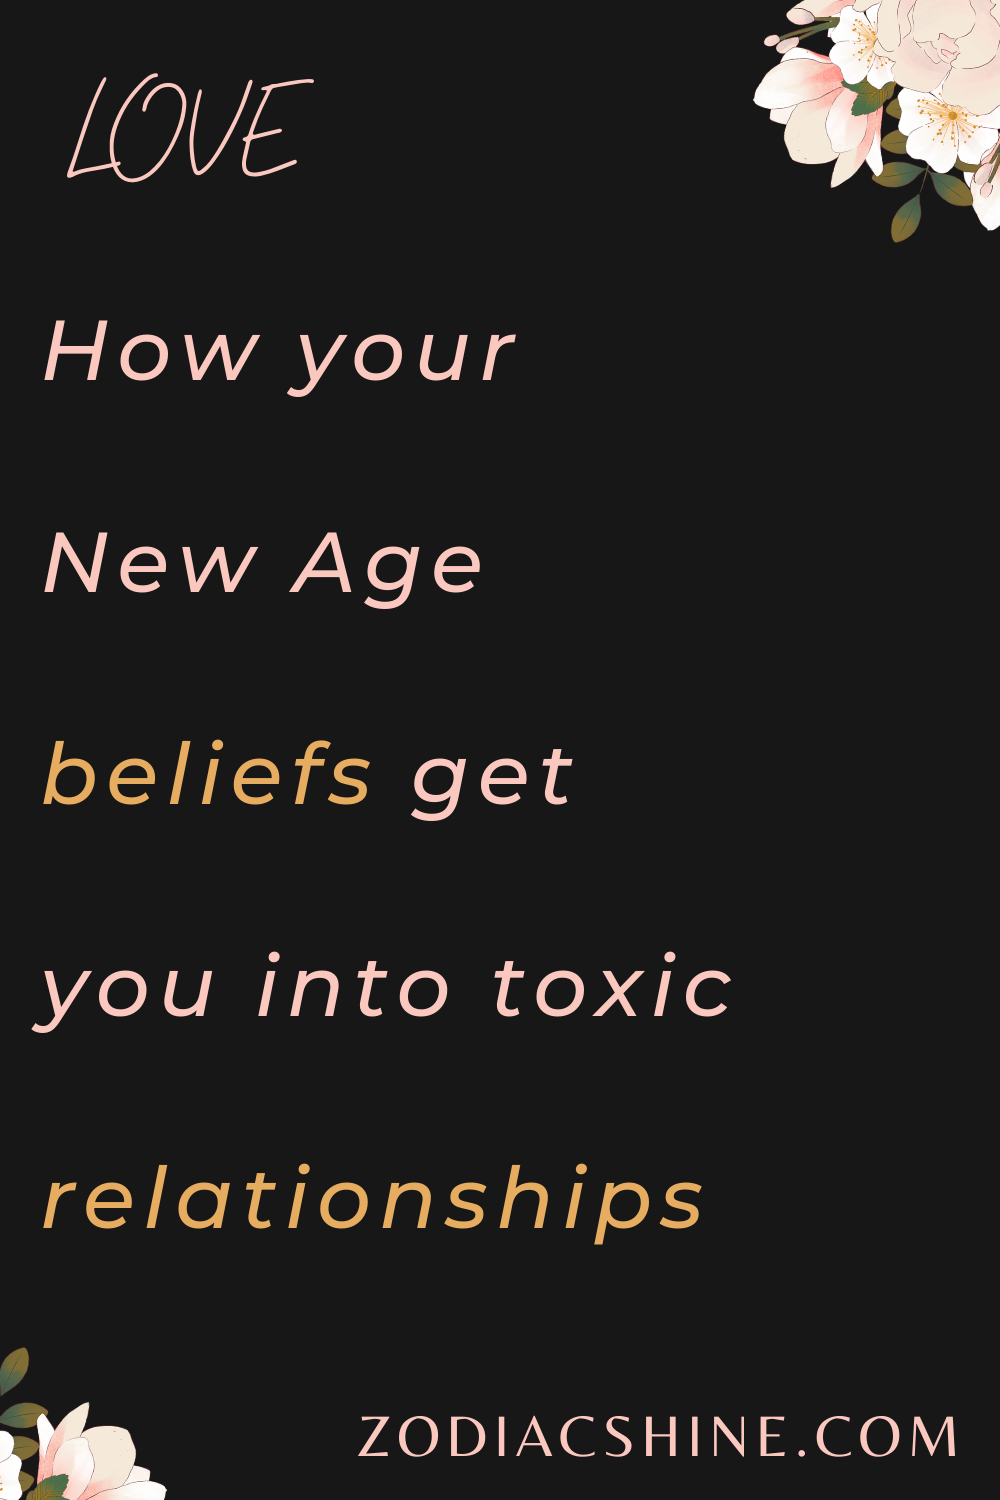 How your New Age beliefs get you into toxic relationships